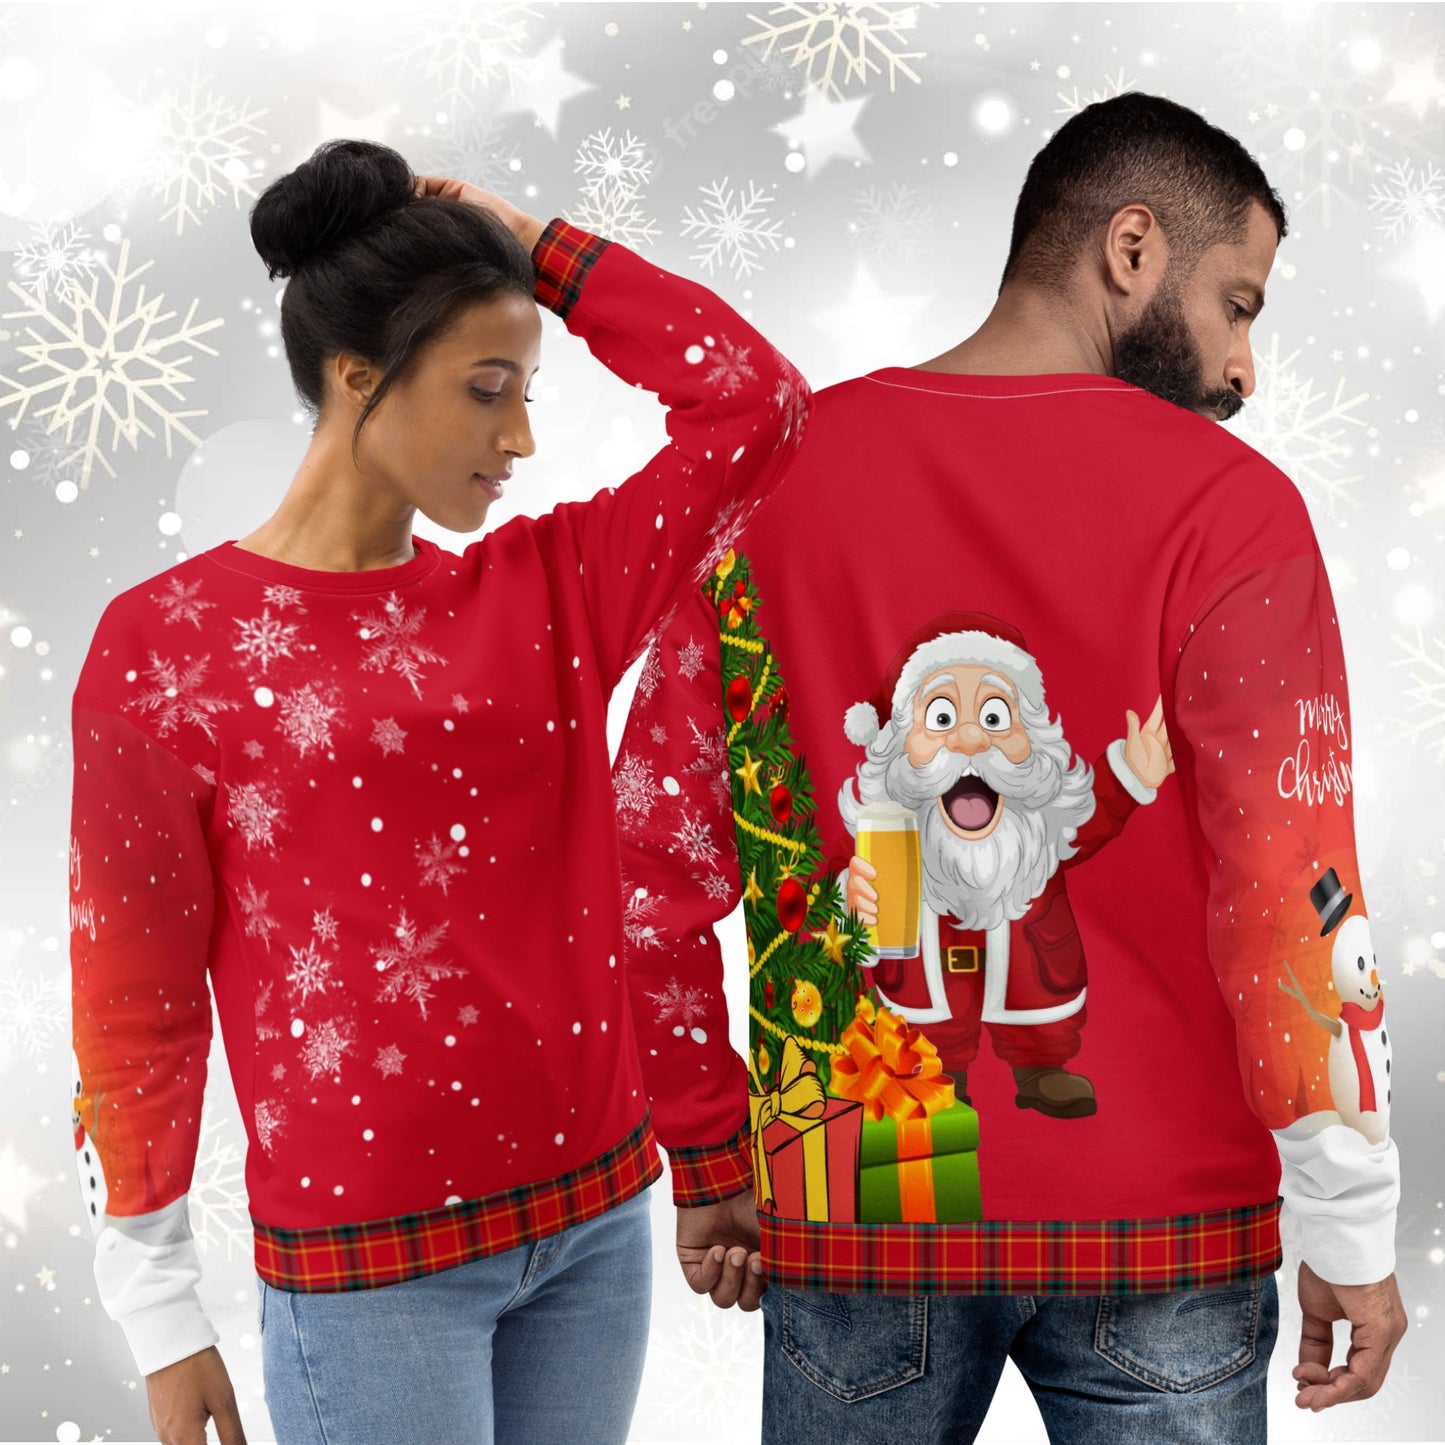 Christmas Sweater with unique design for Men and Women